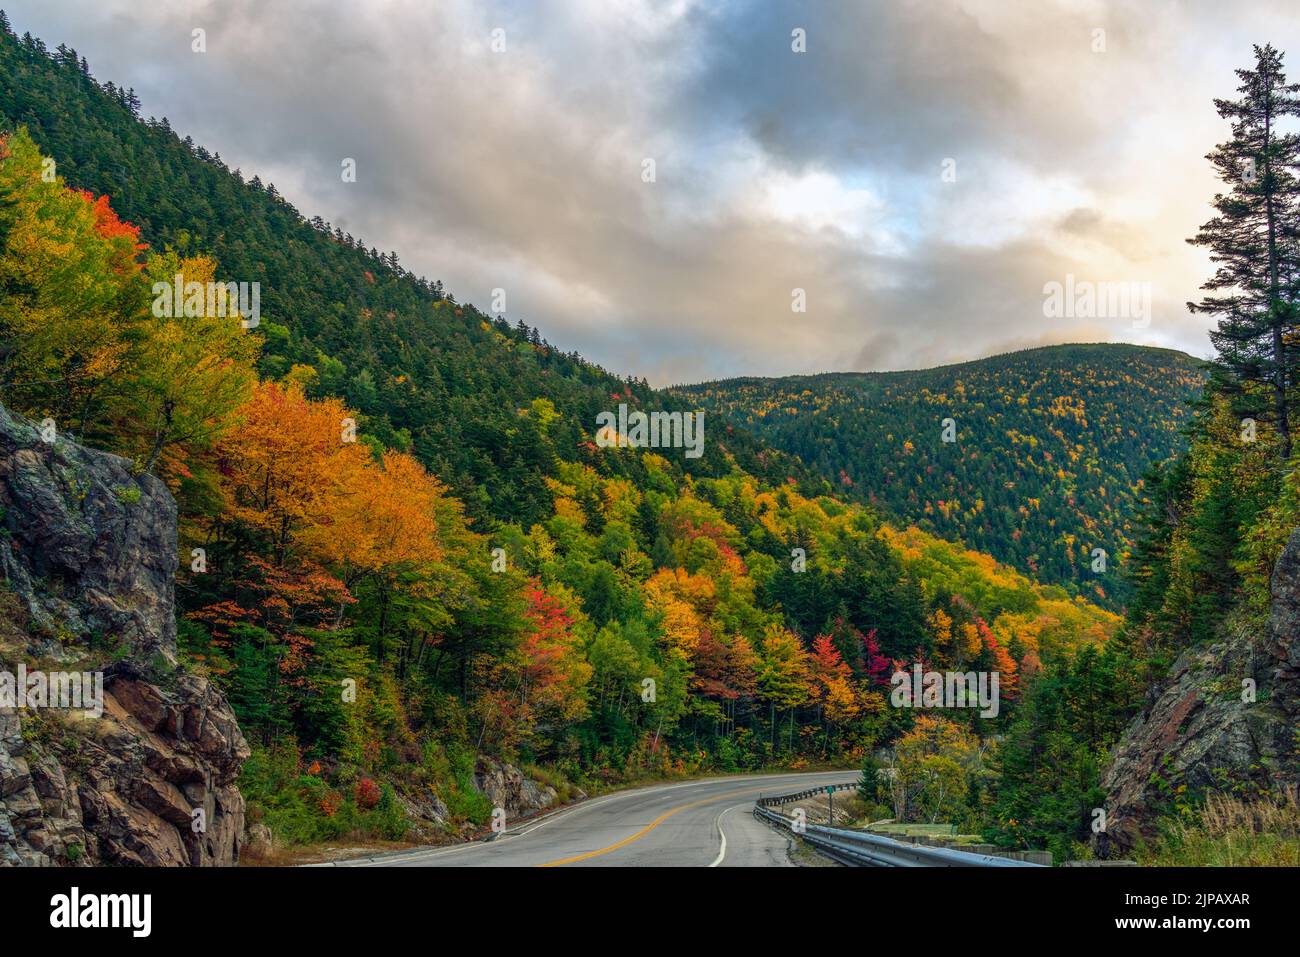 A two-lane highway winds through colorful autumn foliage at Crawford's Notch in New Hampshire's White Mountains. Stock Photo